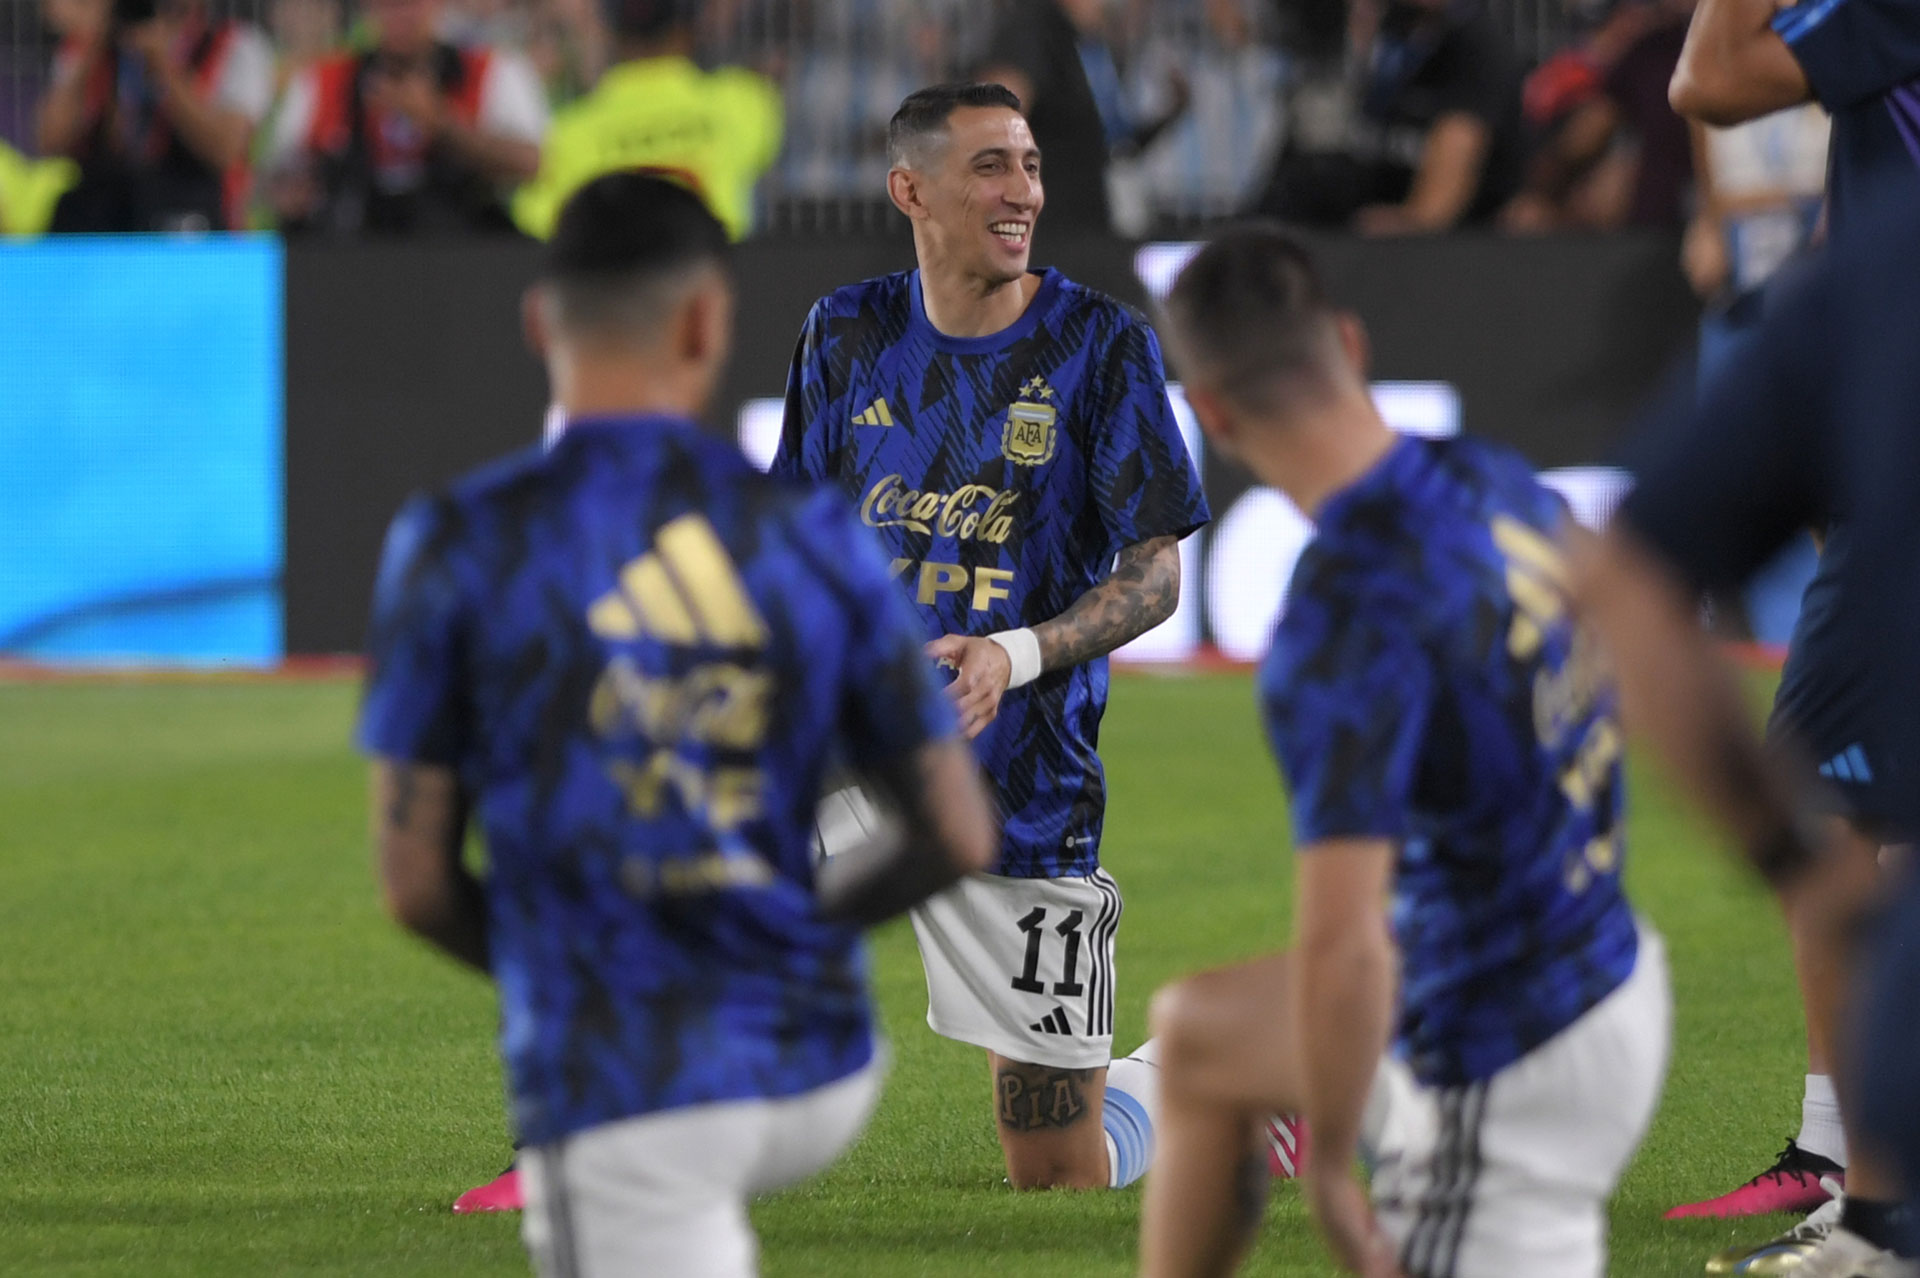 From the warm-up, the Argentine players received a standing ovation from the public